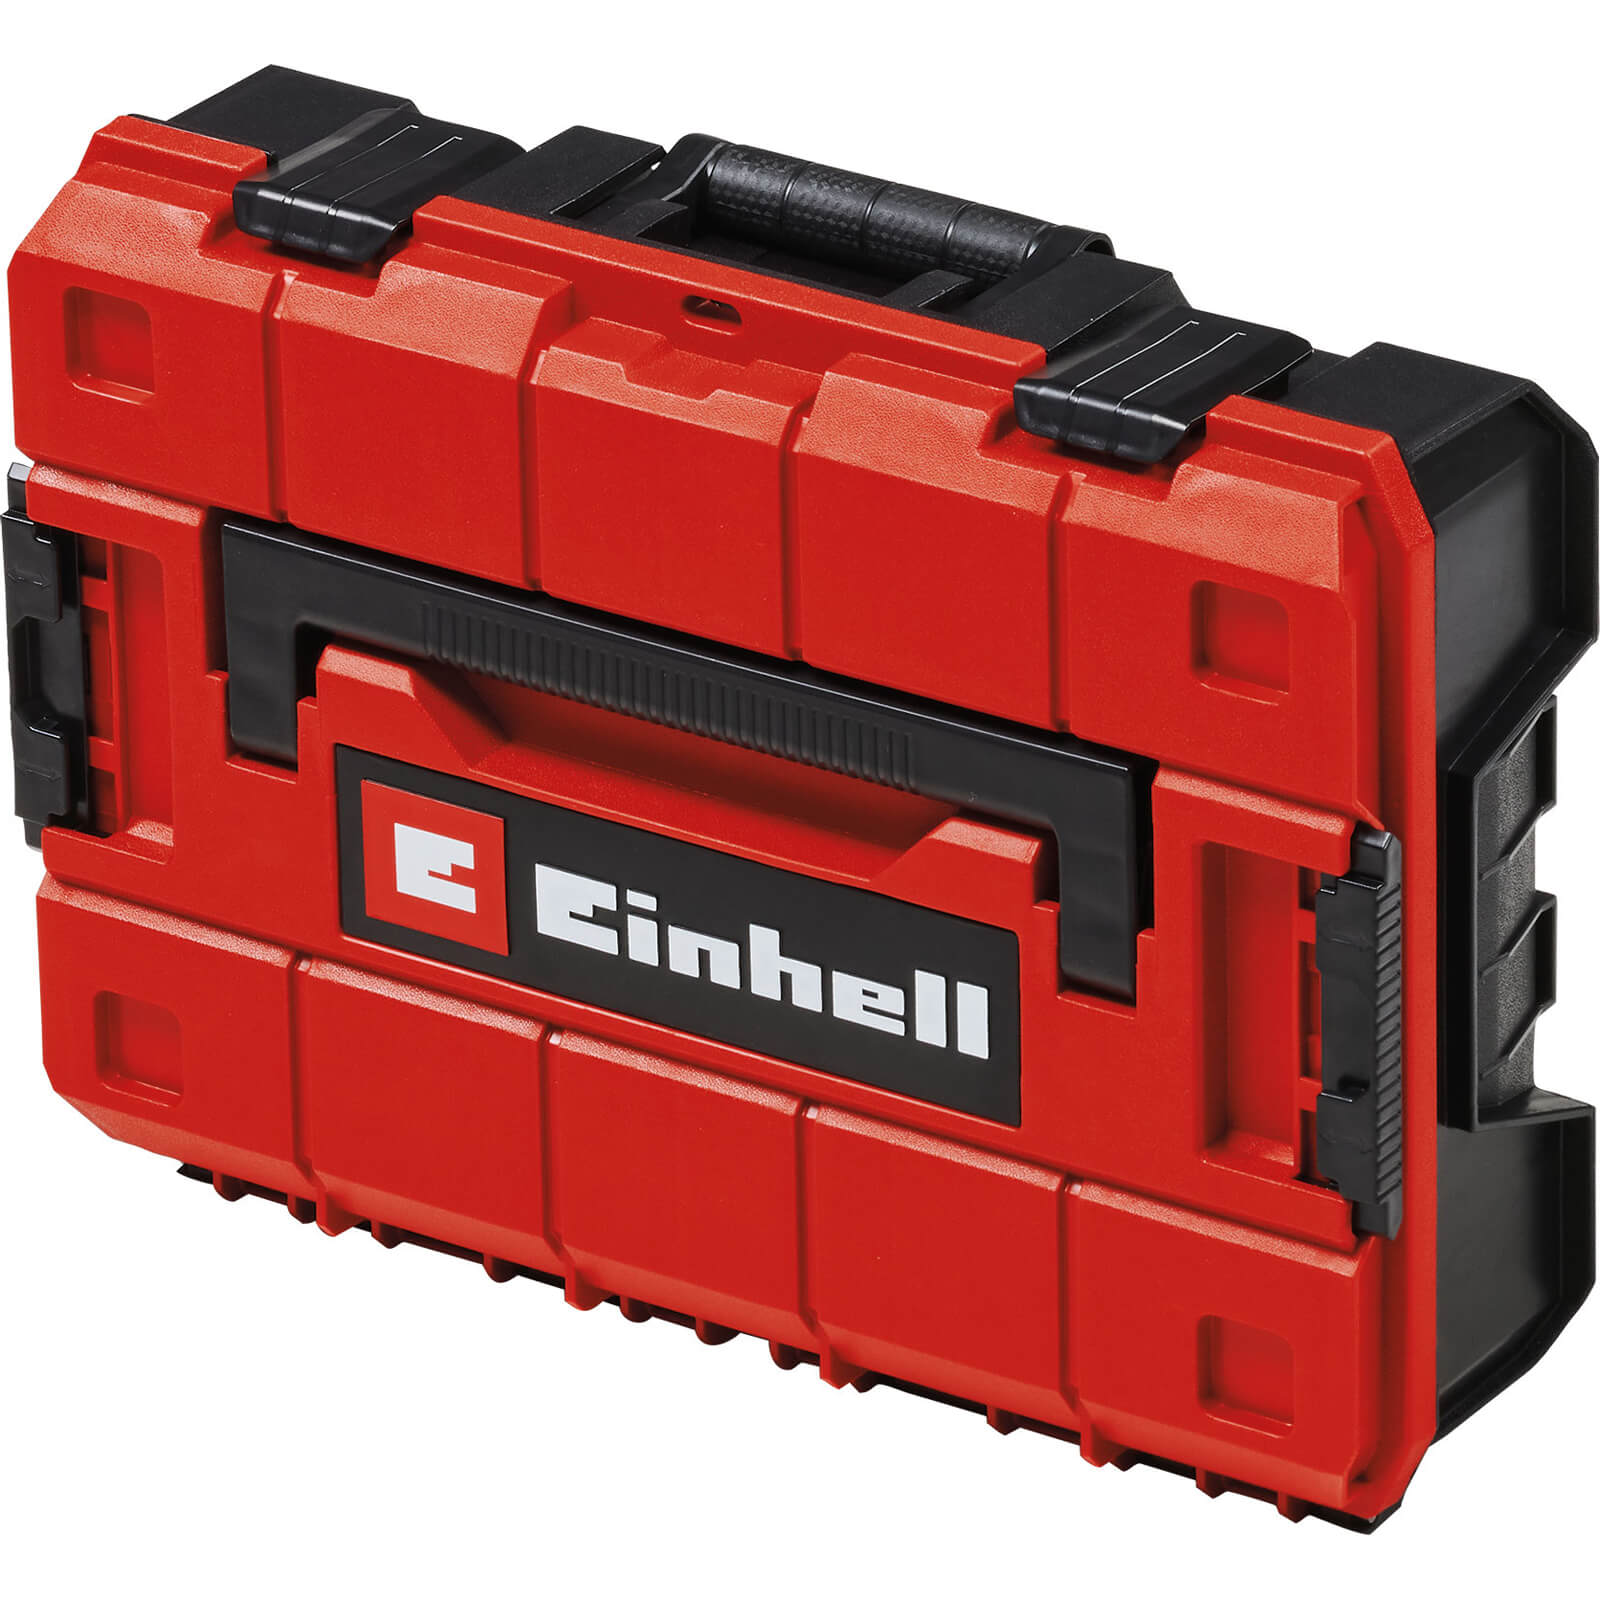 Photo of Einhell E-case Stackable Power Tool Case With Foam Inserts